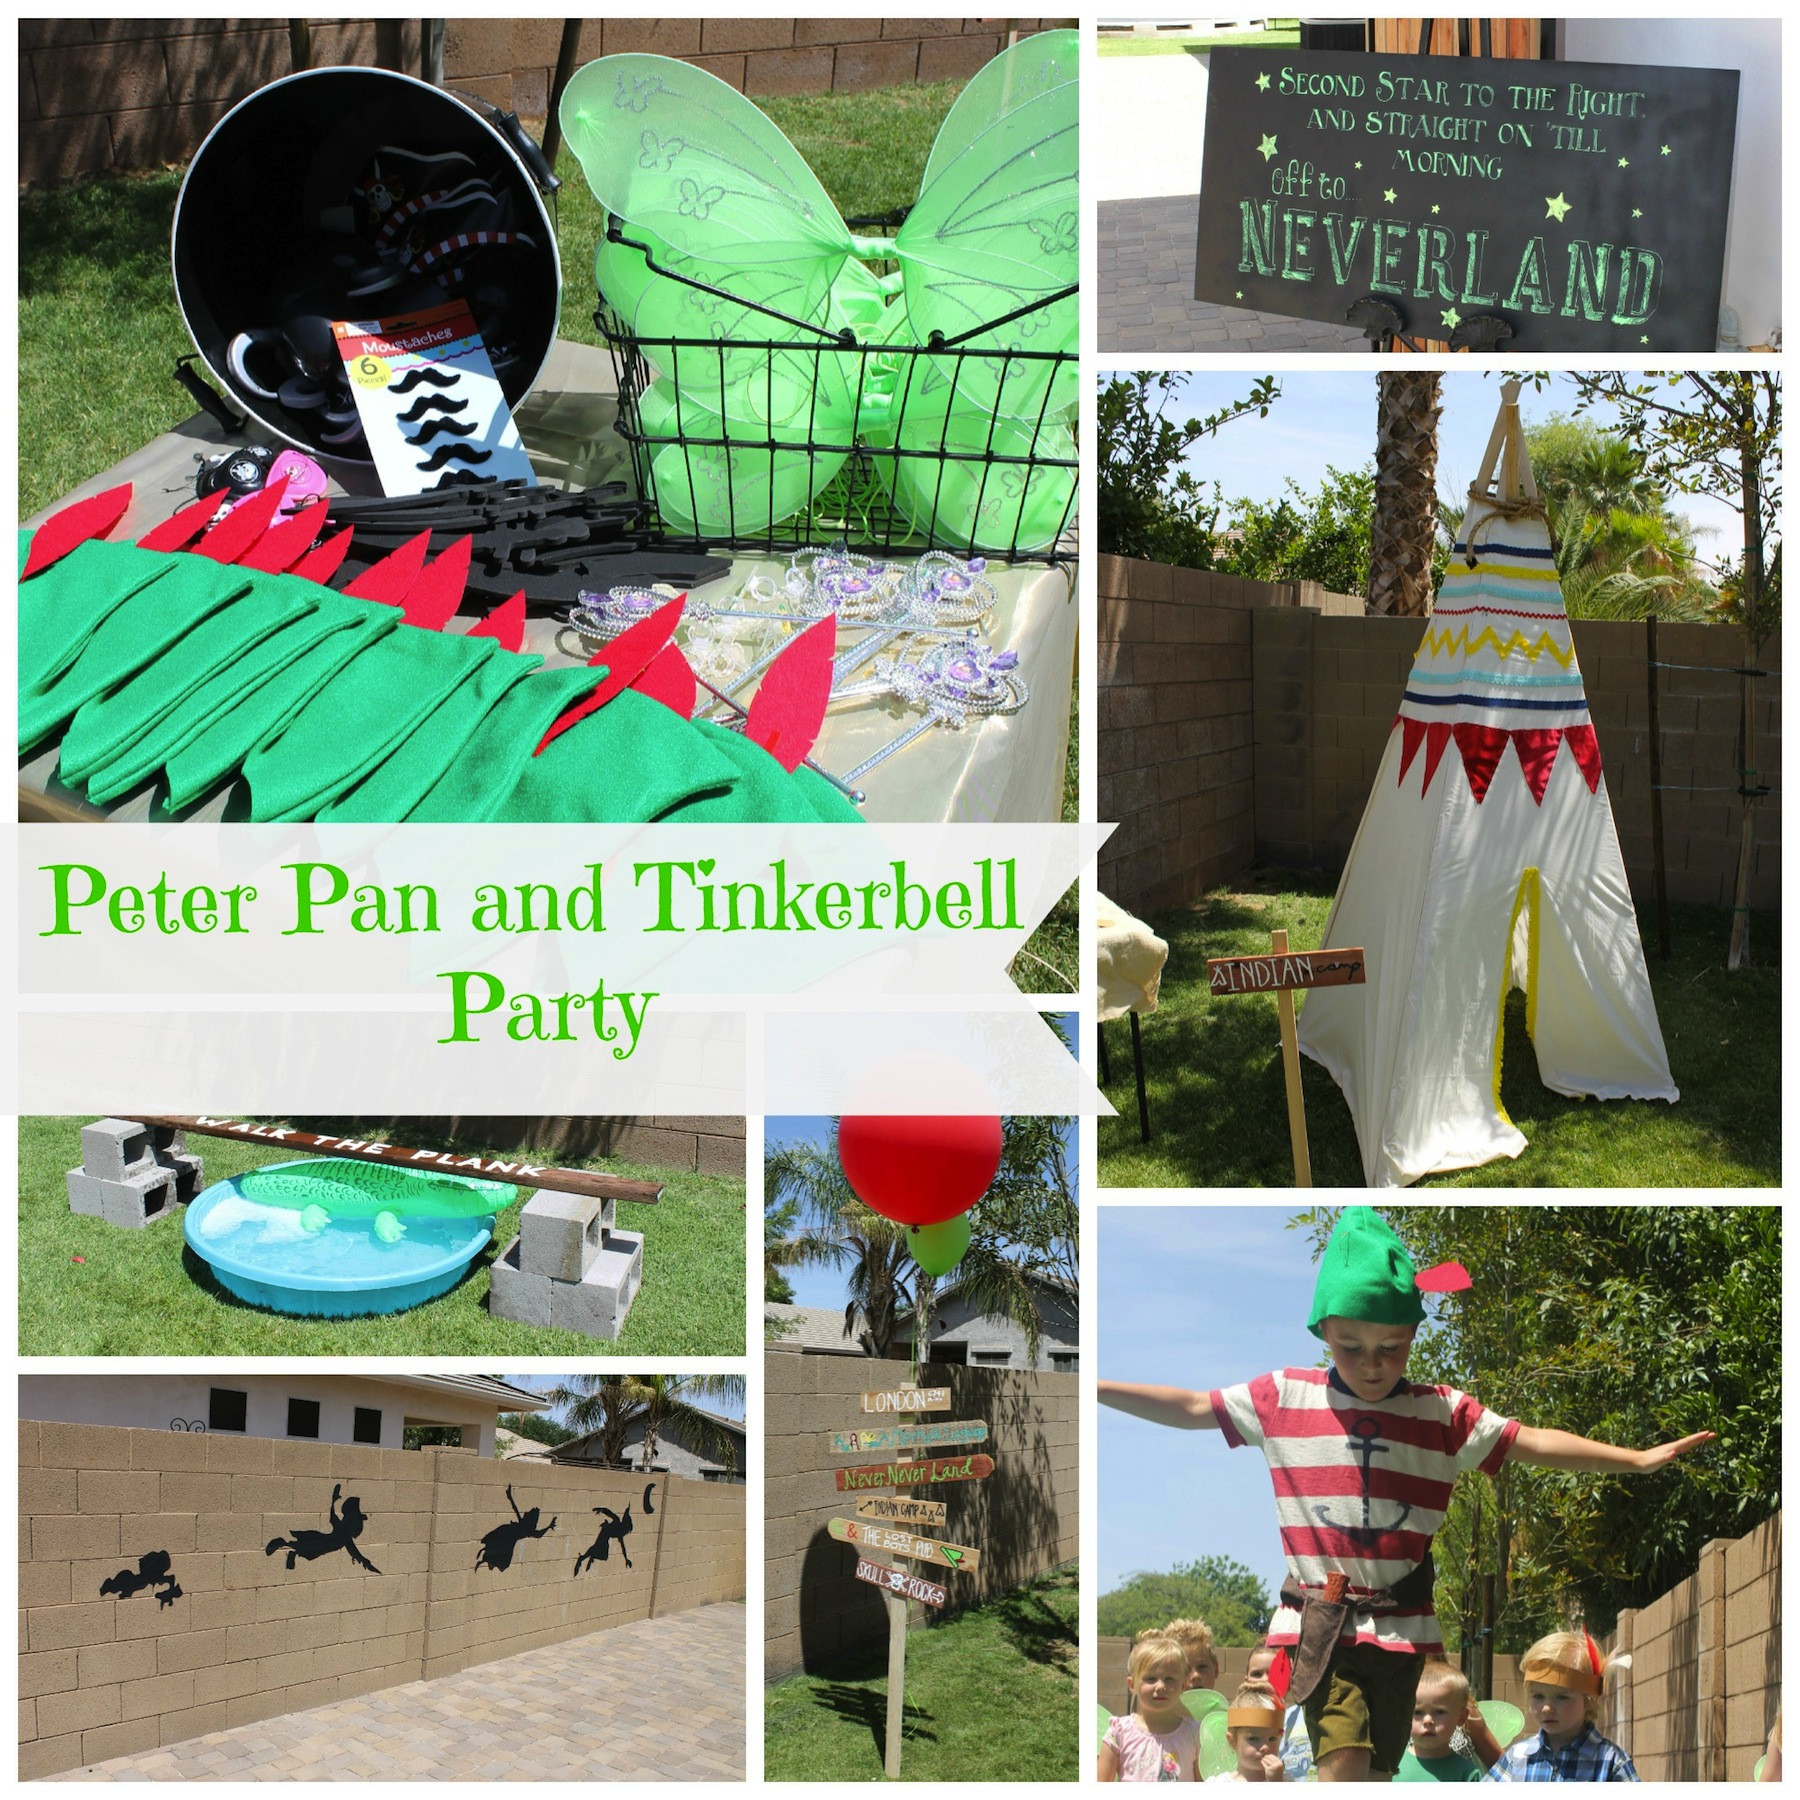 Peter Pan Birthday Party Supplies
 Peter Pan and Tinkerbell Party Classy Clutter